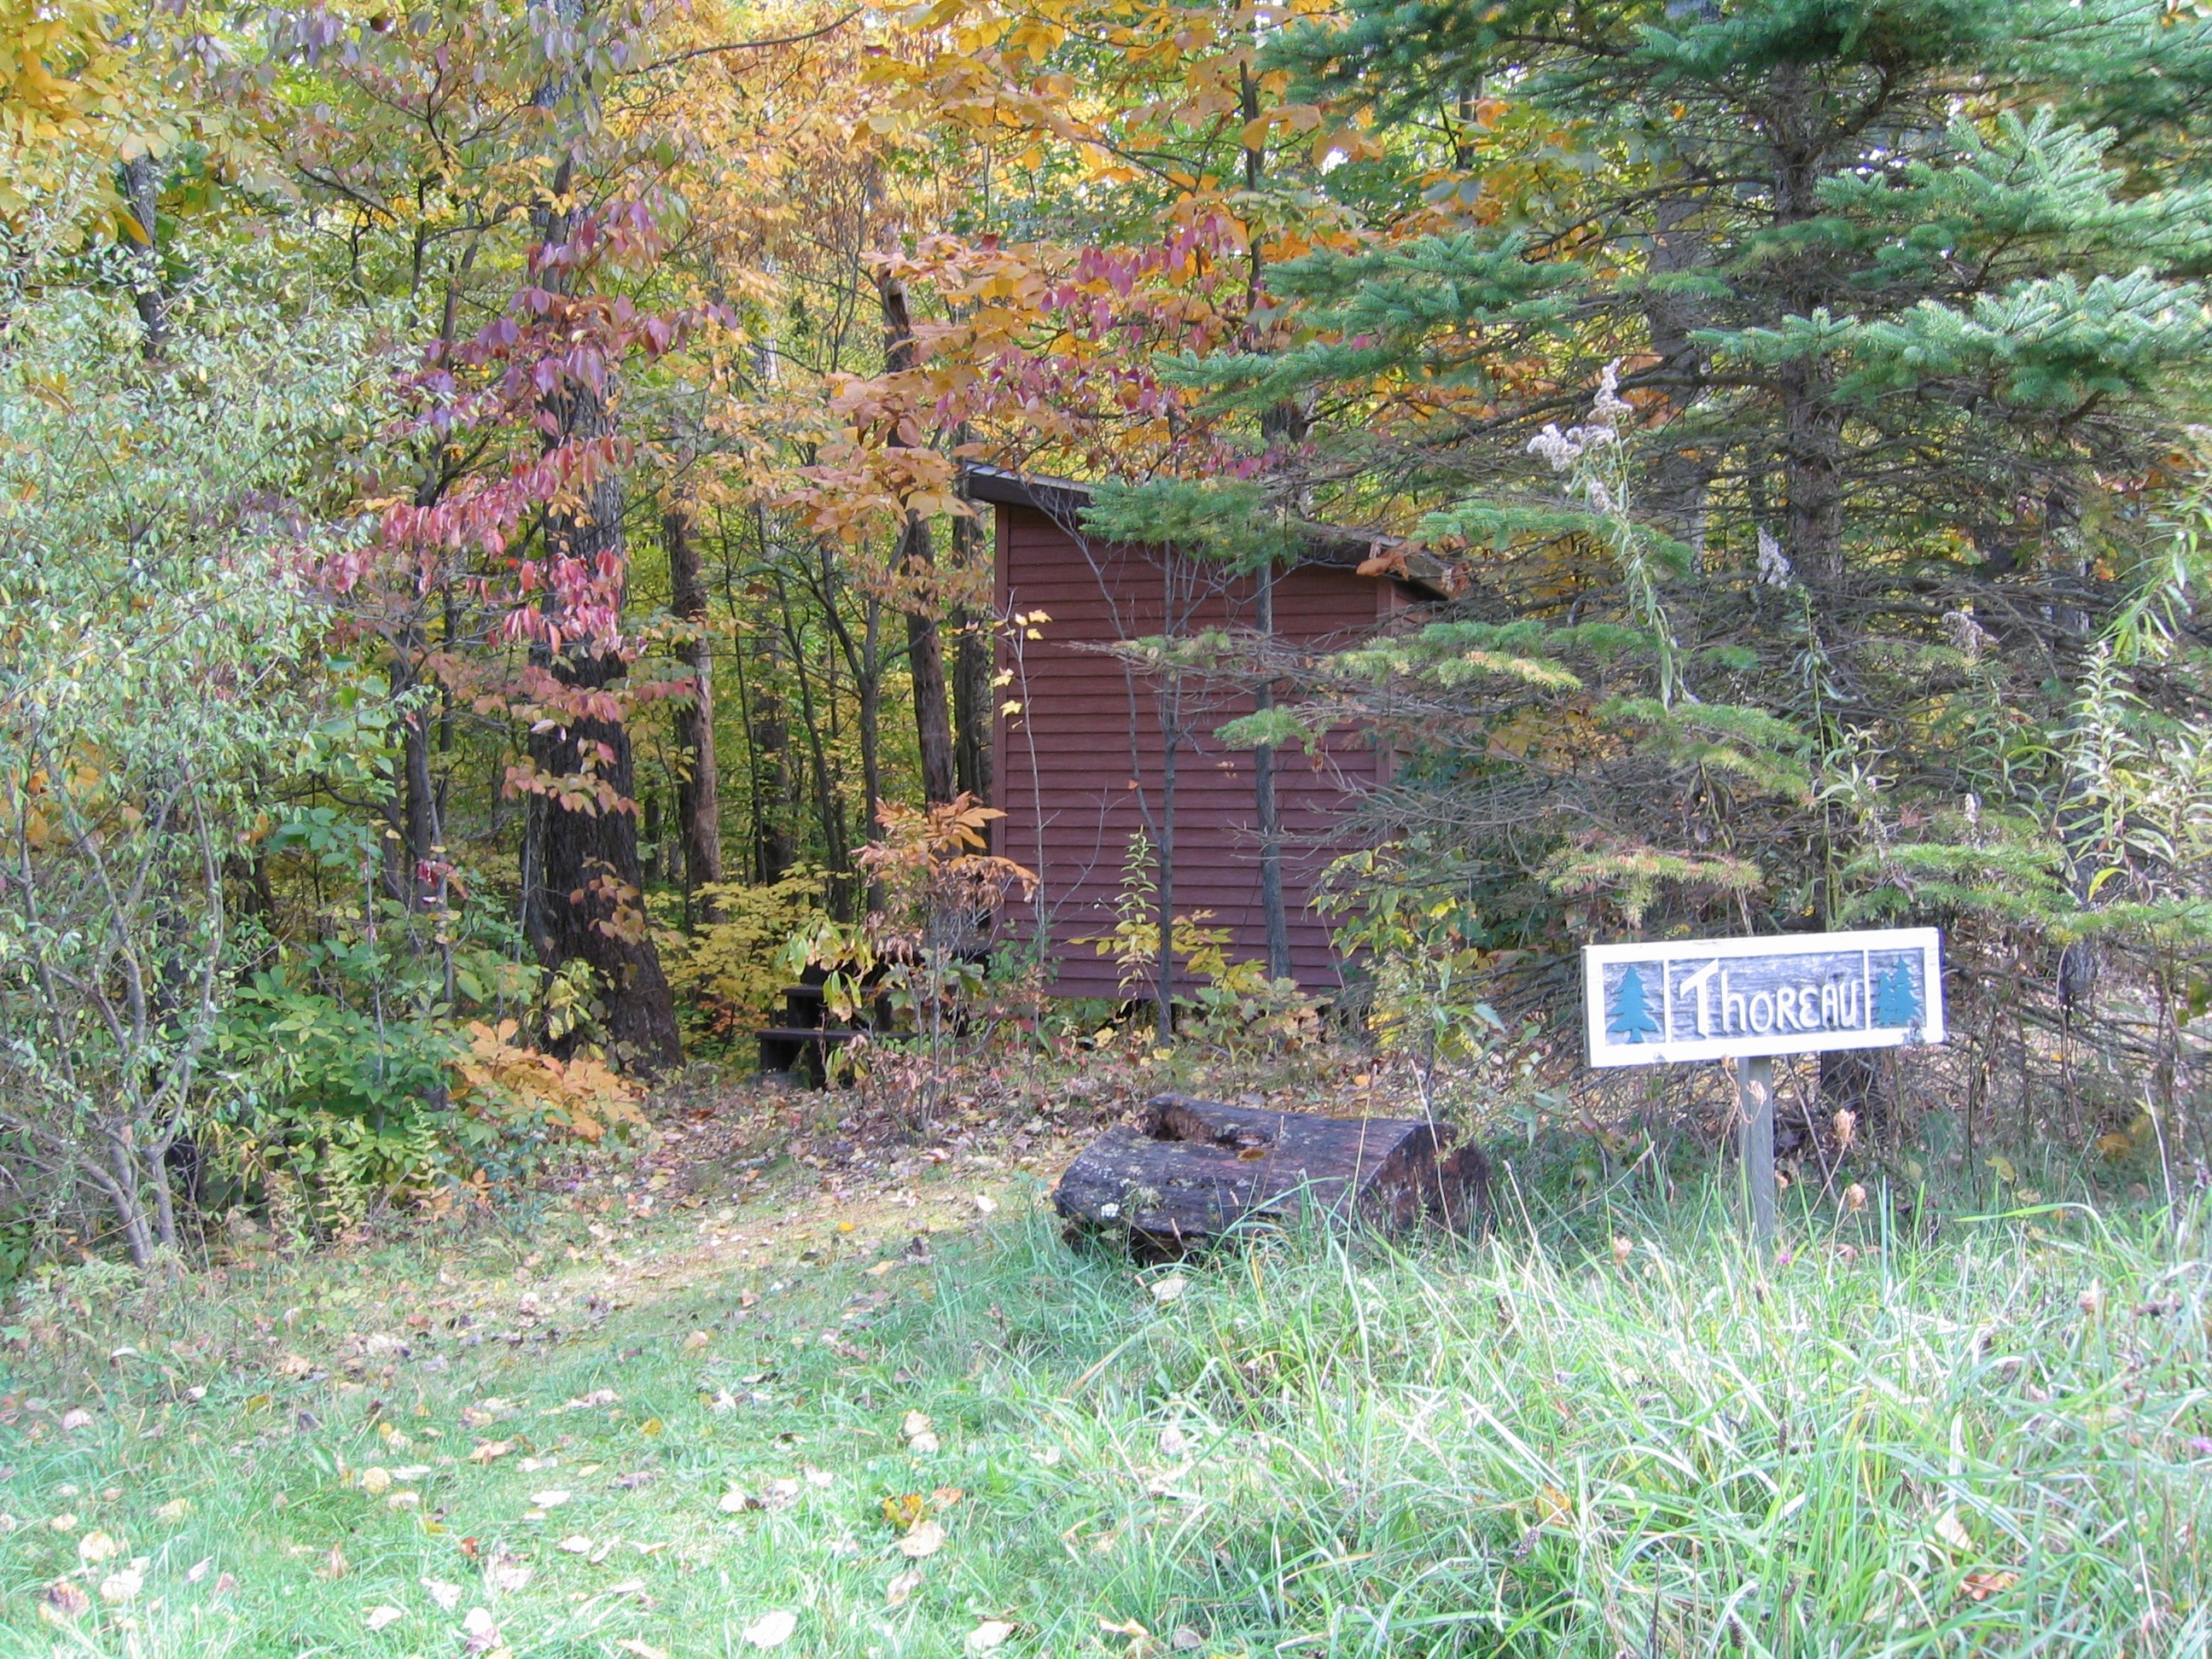 Thoreau cabin in the woods